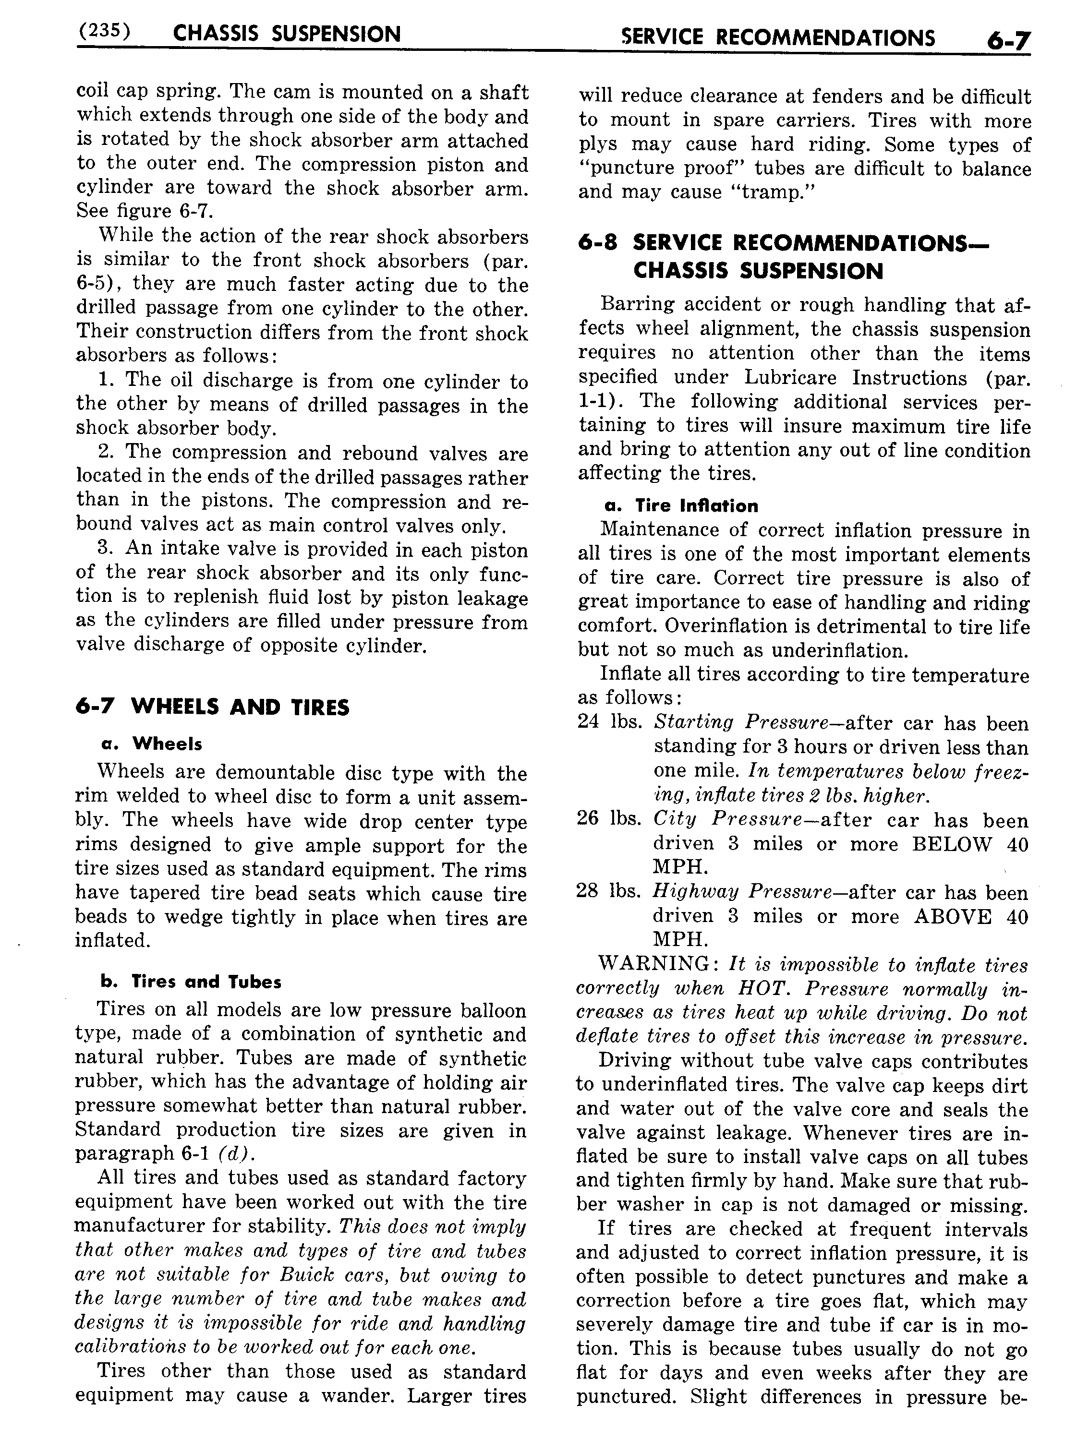 n_07 1951 Buick Shop Manual - Chassis Suspension-007-007.jpg